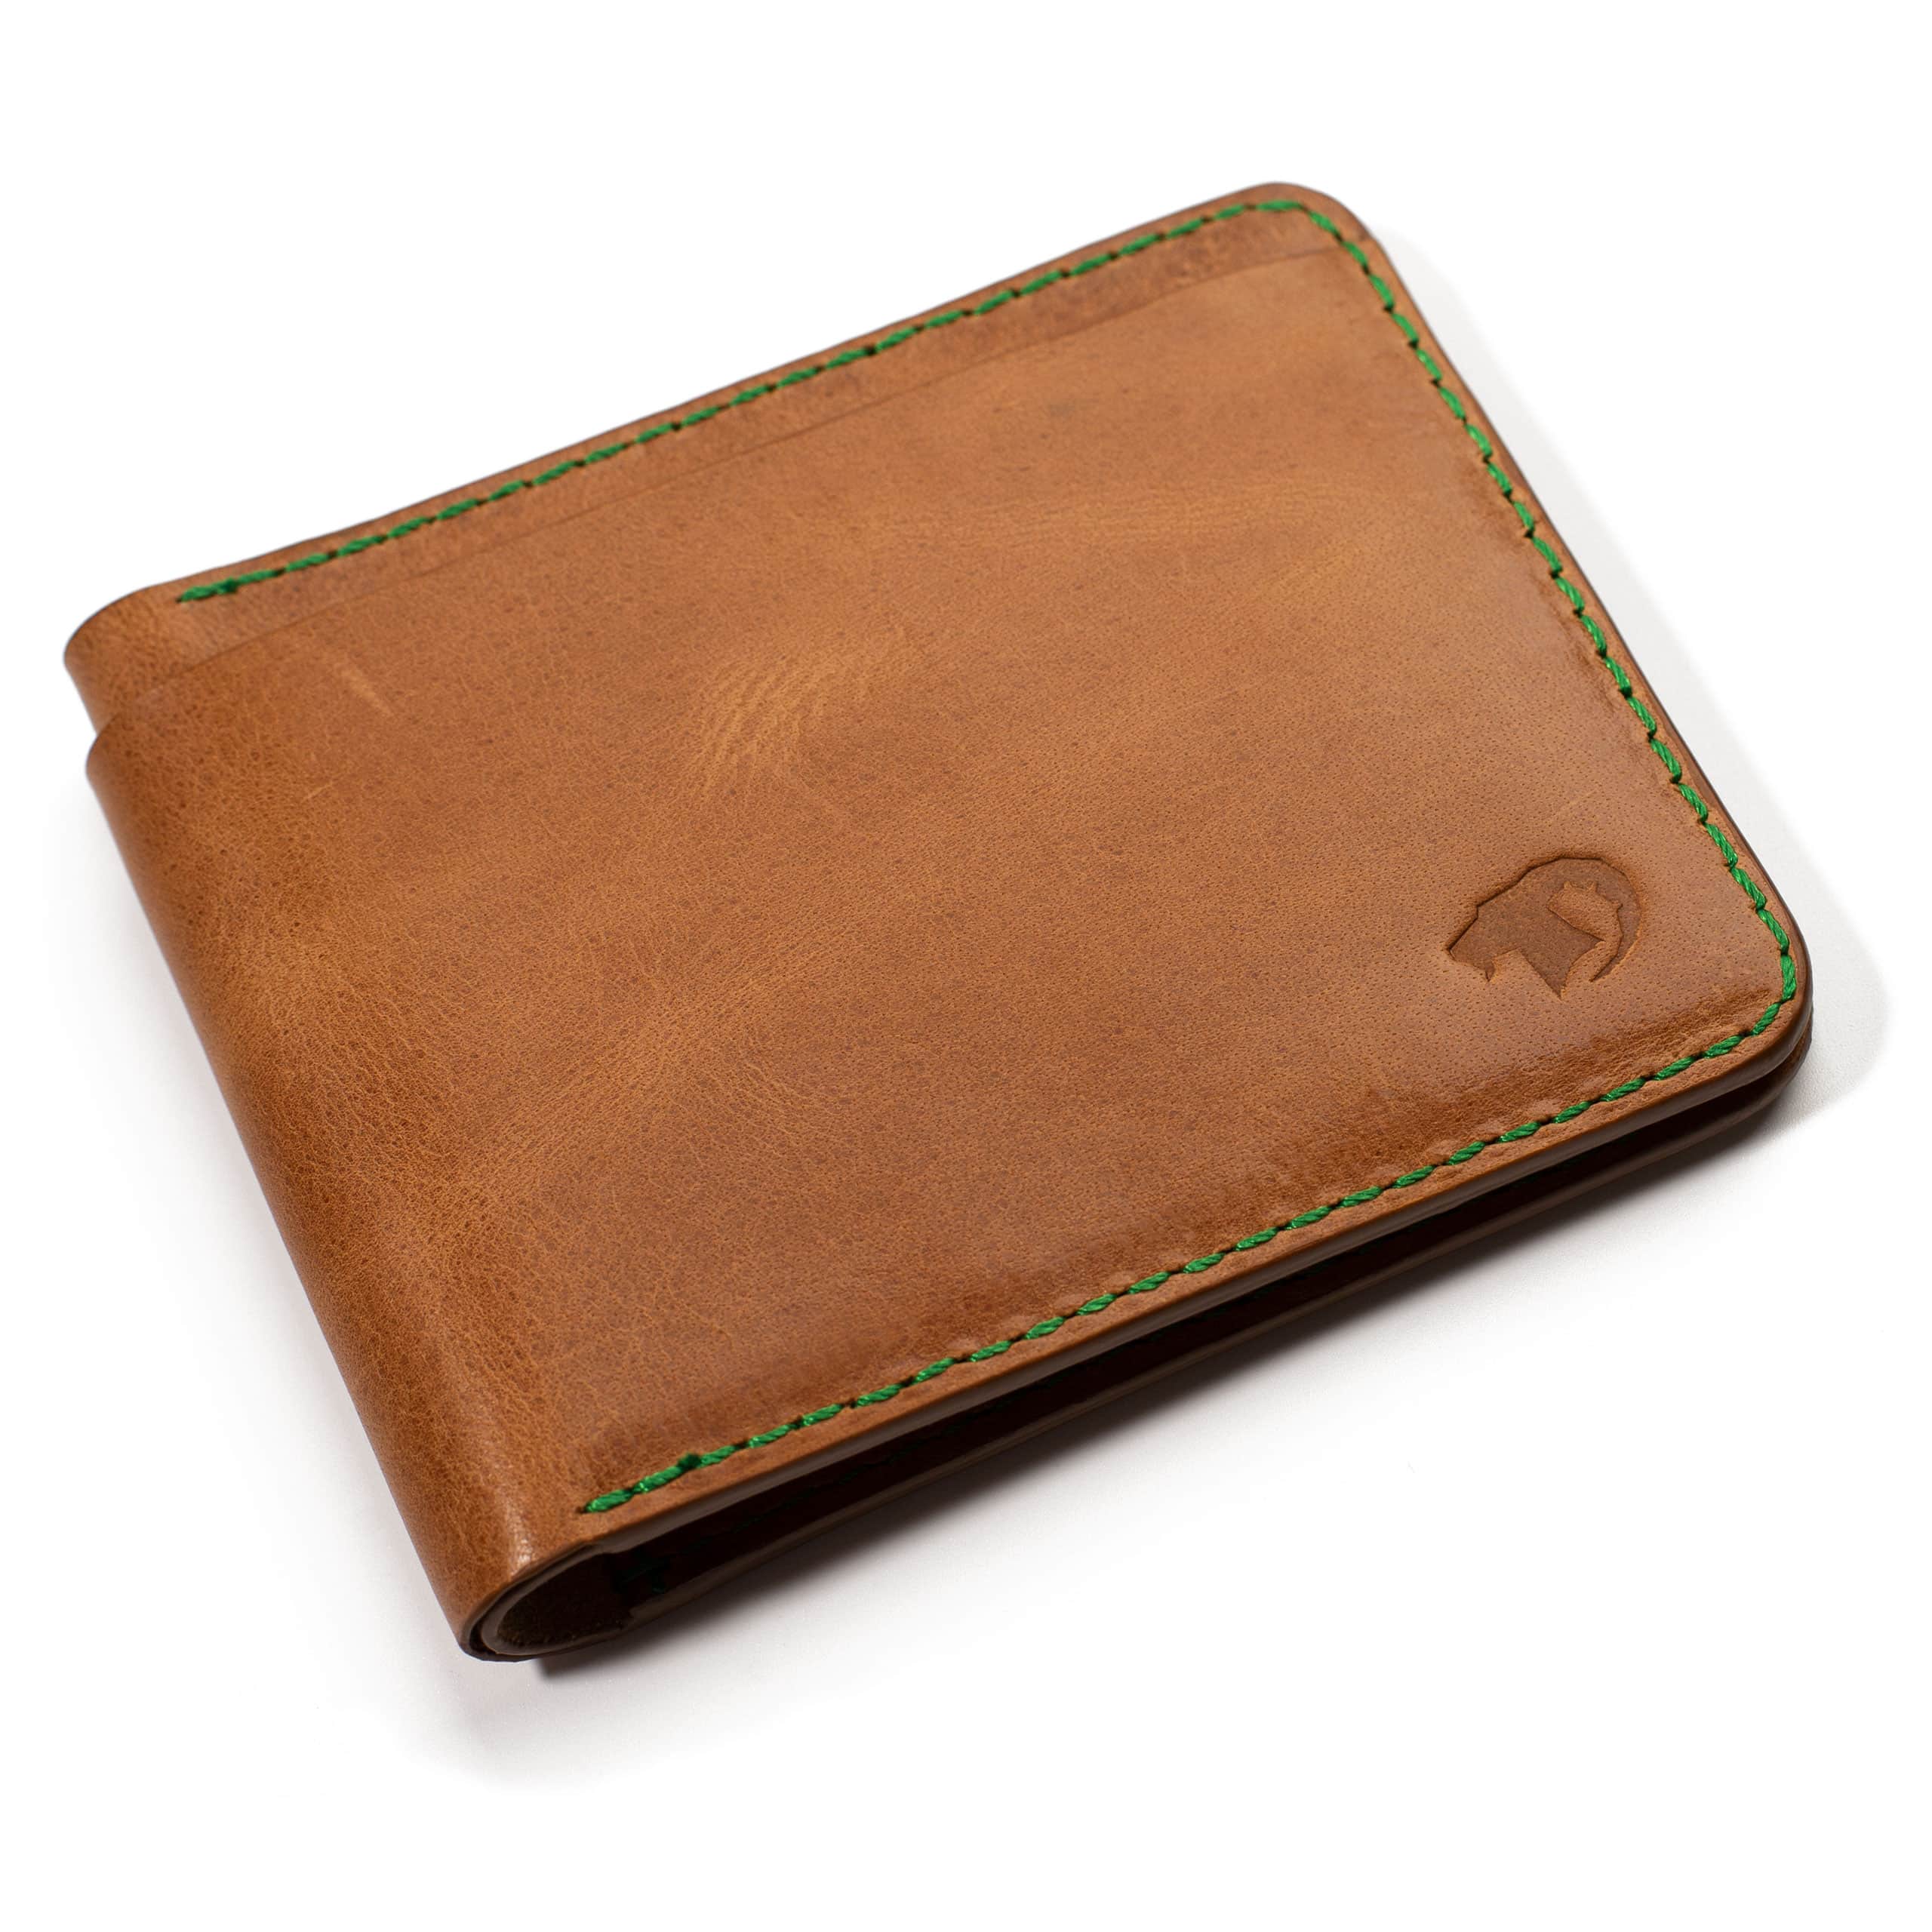 brown leather wallet